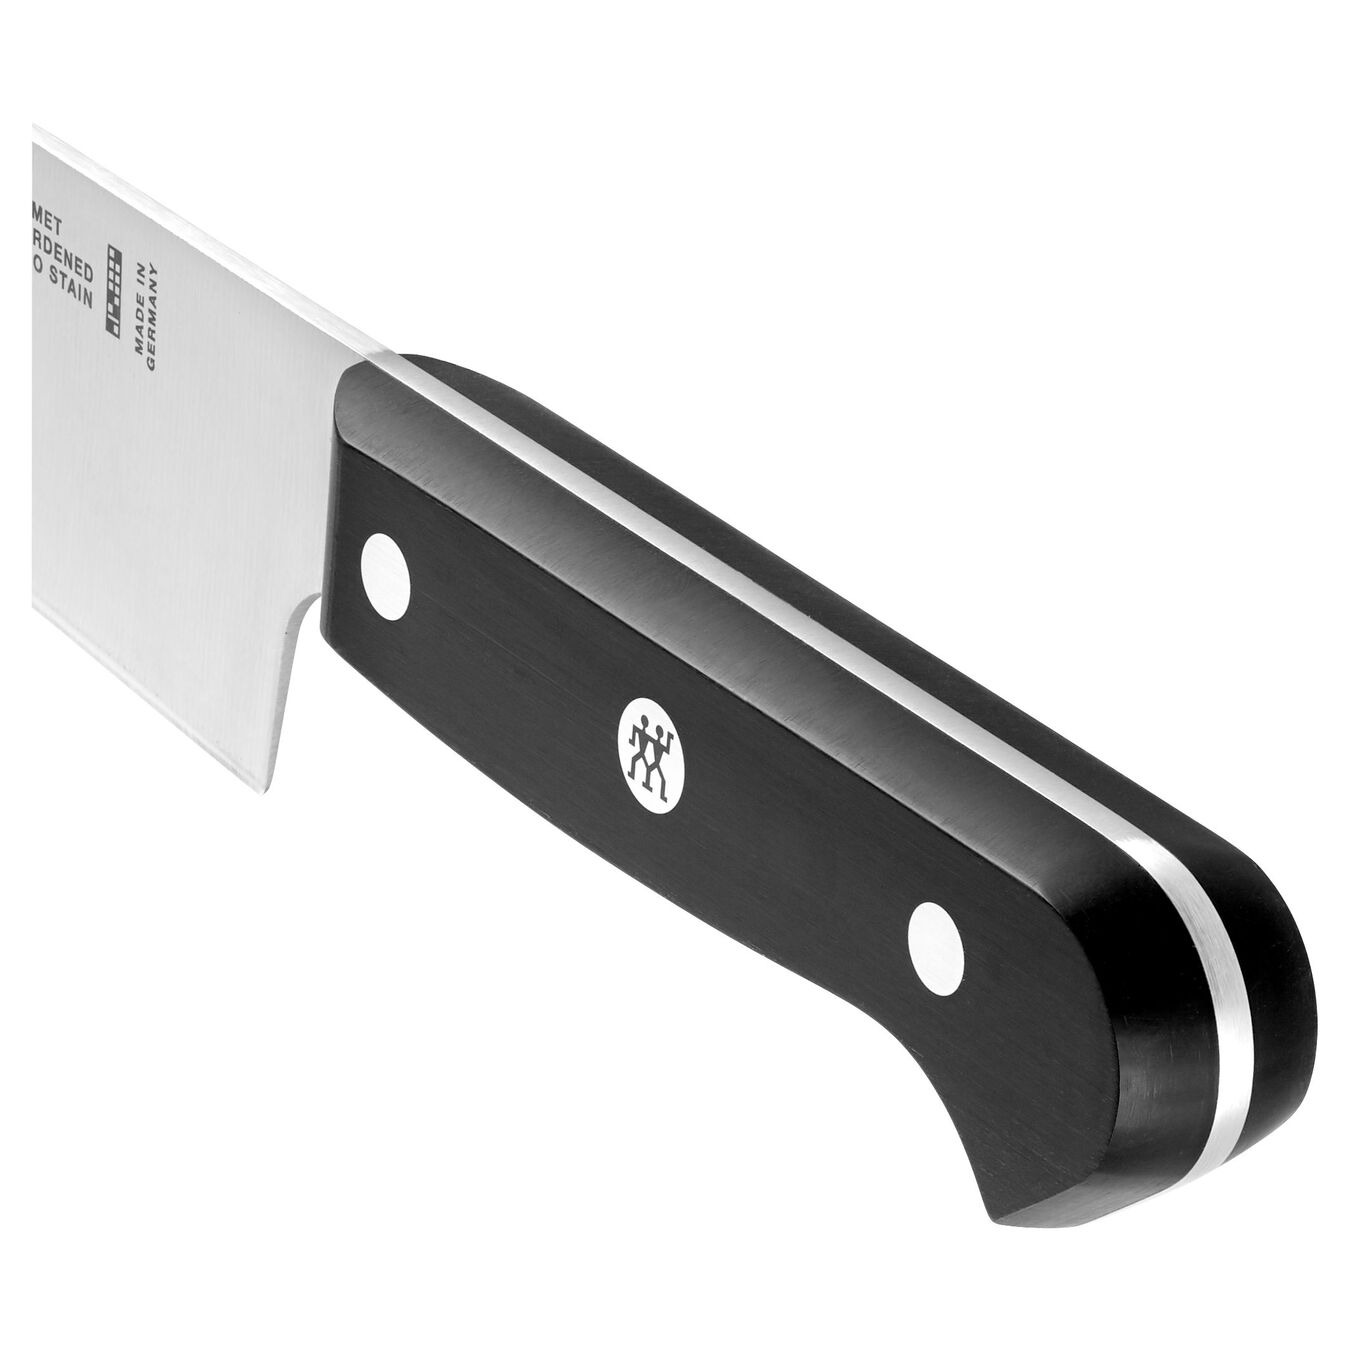 J.L. Hufford 8″ Extra Wide Chef's Knife - ON SALE!